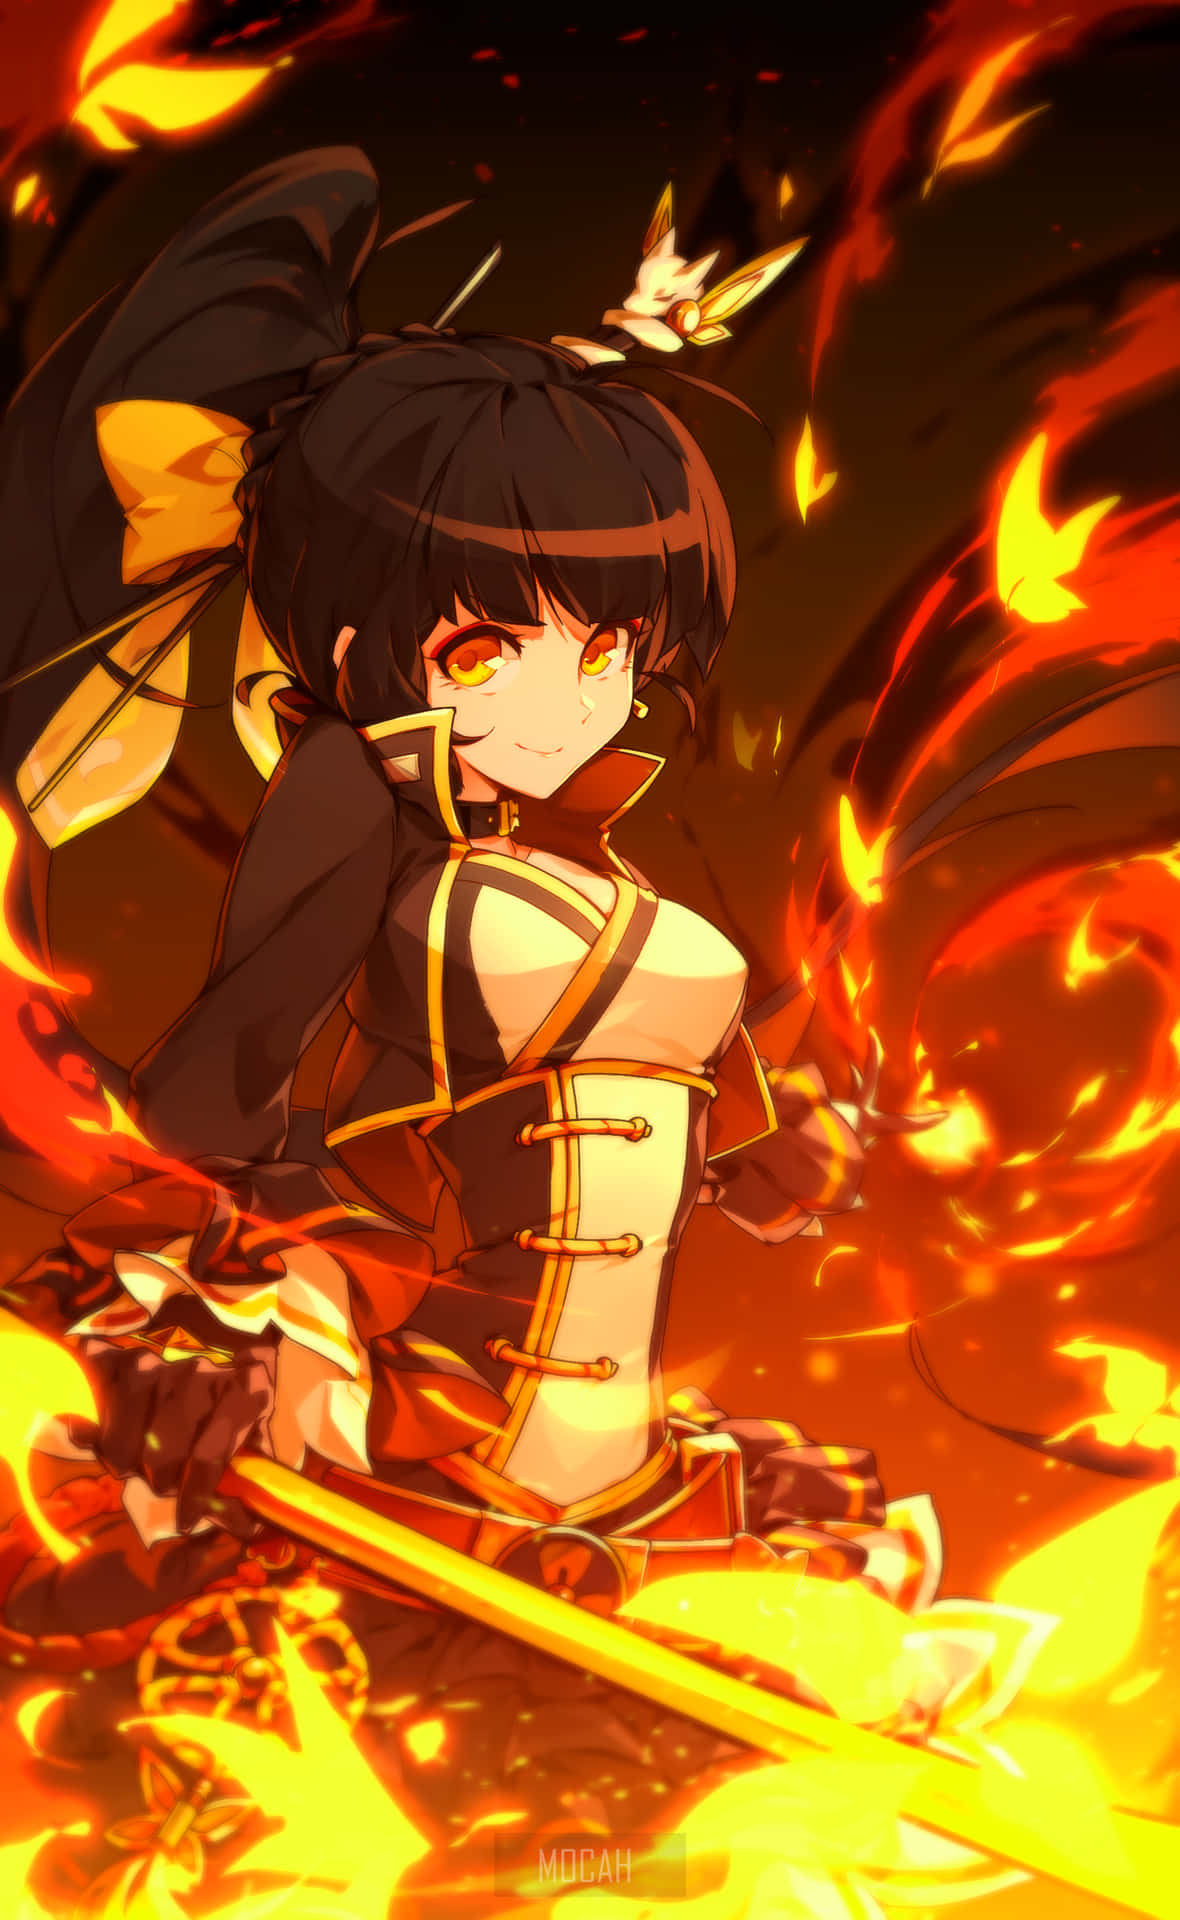 Anime Girl With Sword On Fire Wallpaper